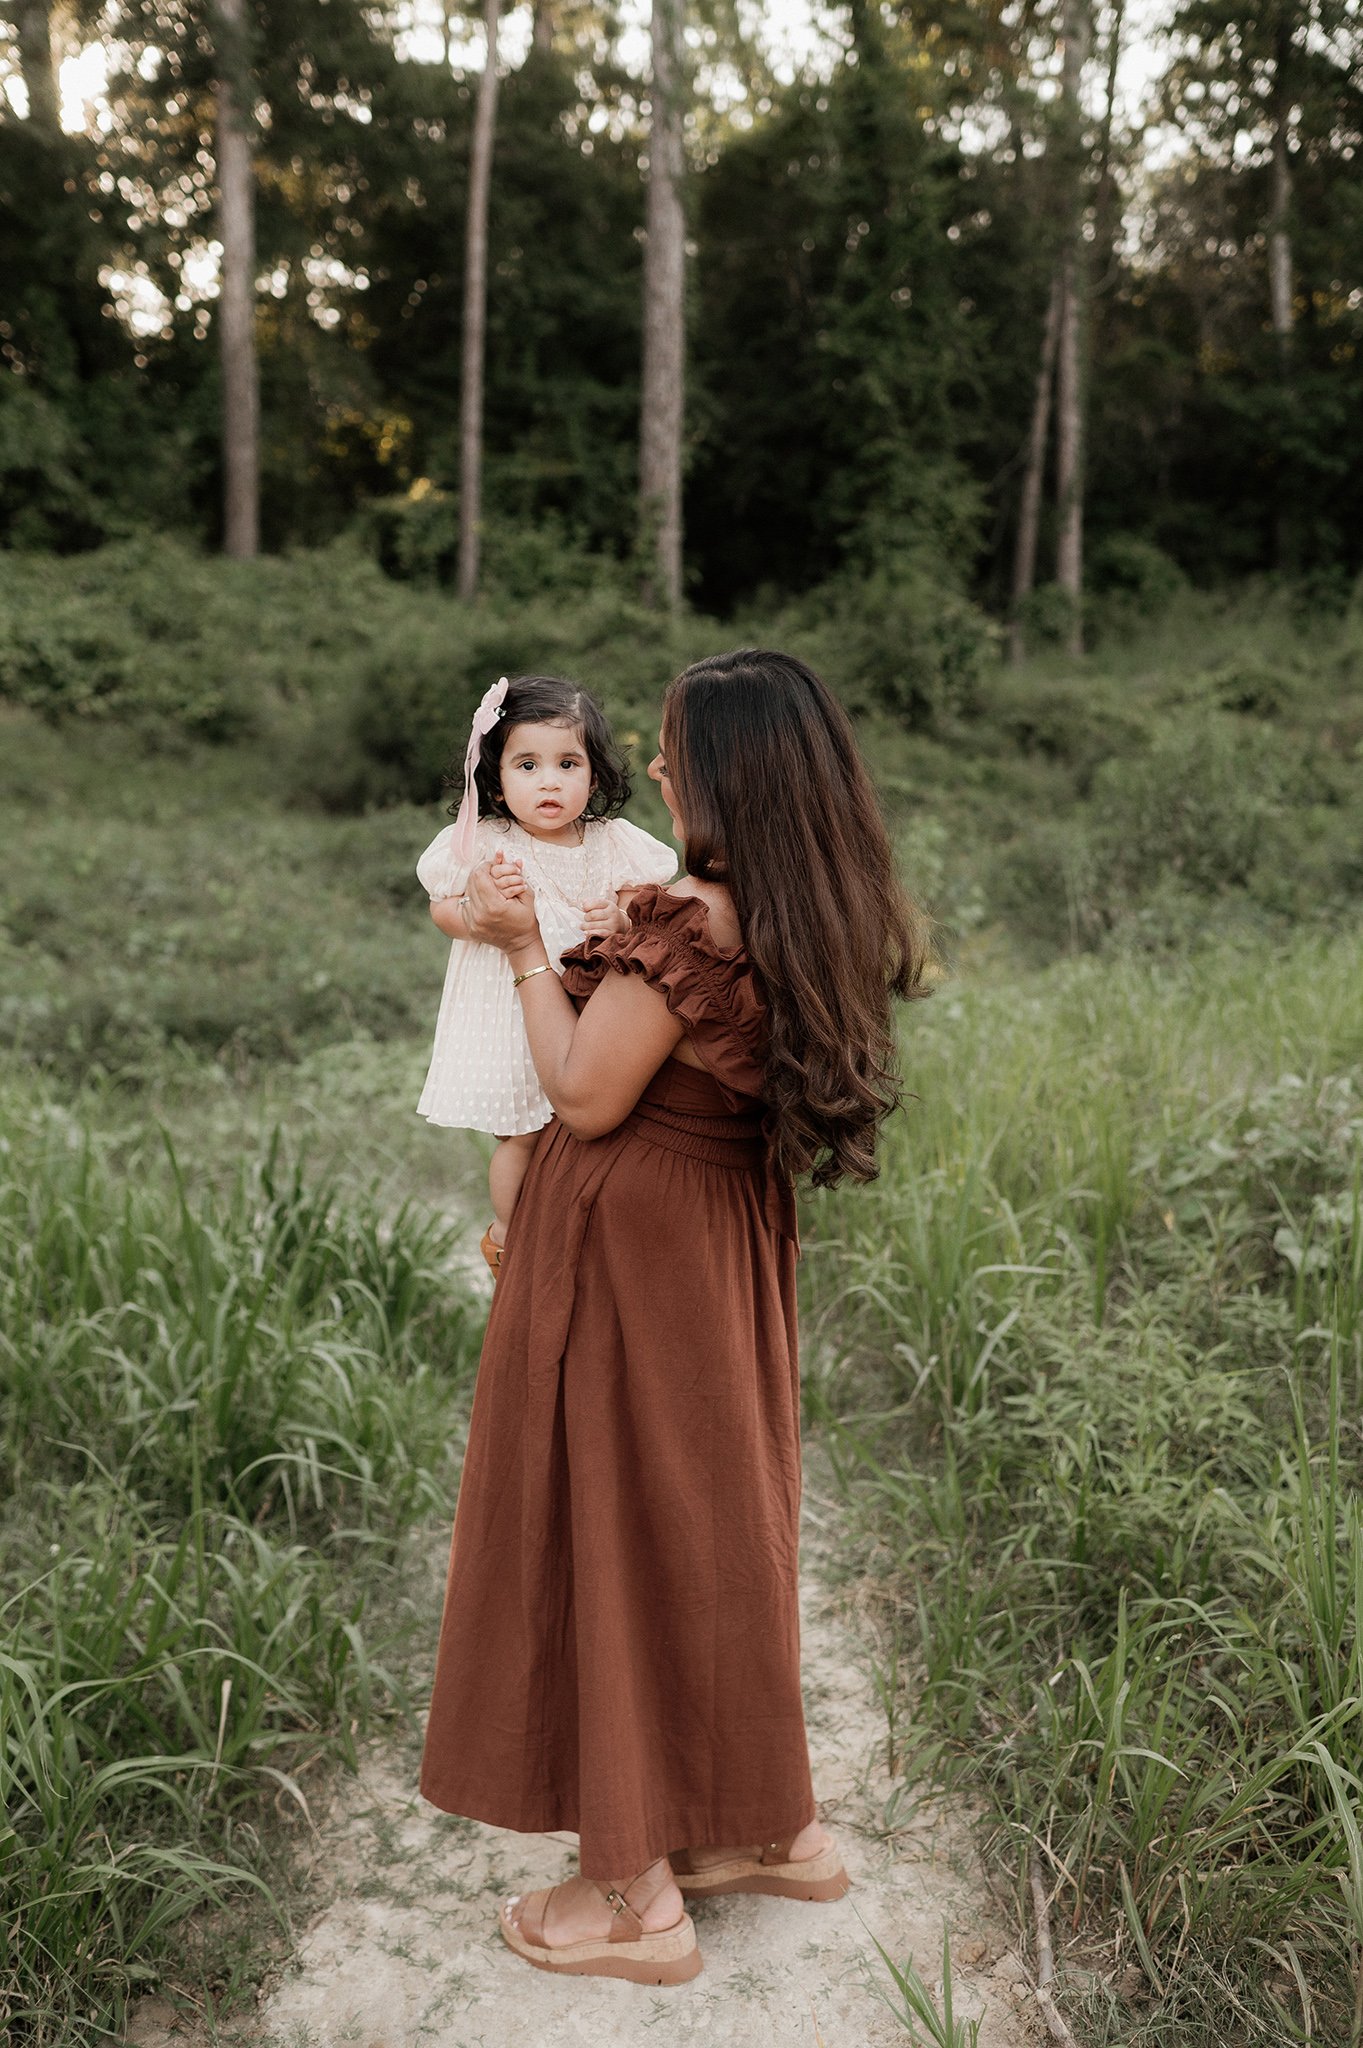 the woodlands family photographer _ conroe photographer _ houston family photographer _ ashley gillen photography _ texas family photographer _ conroe wedding photographer _ conroe texas _ cshi12.jpg